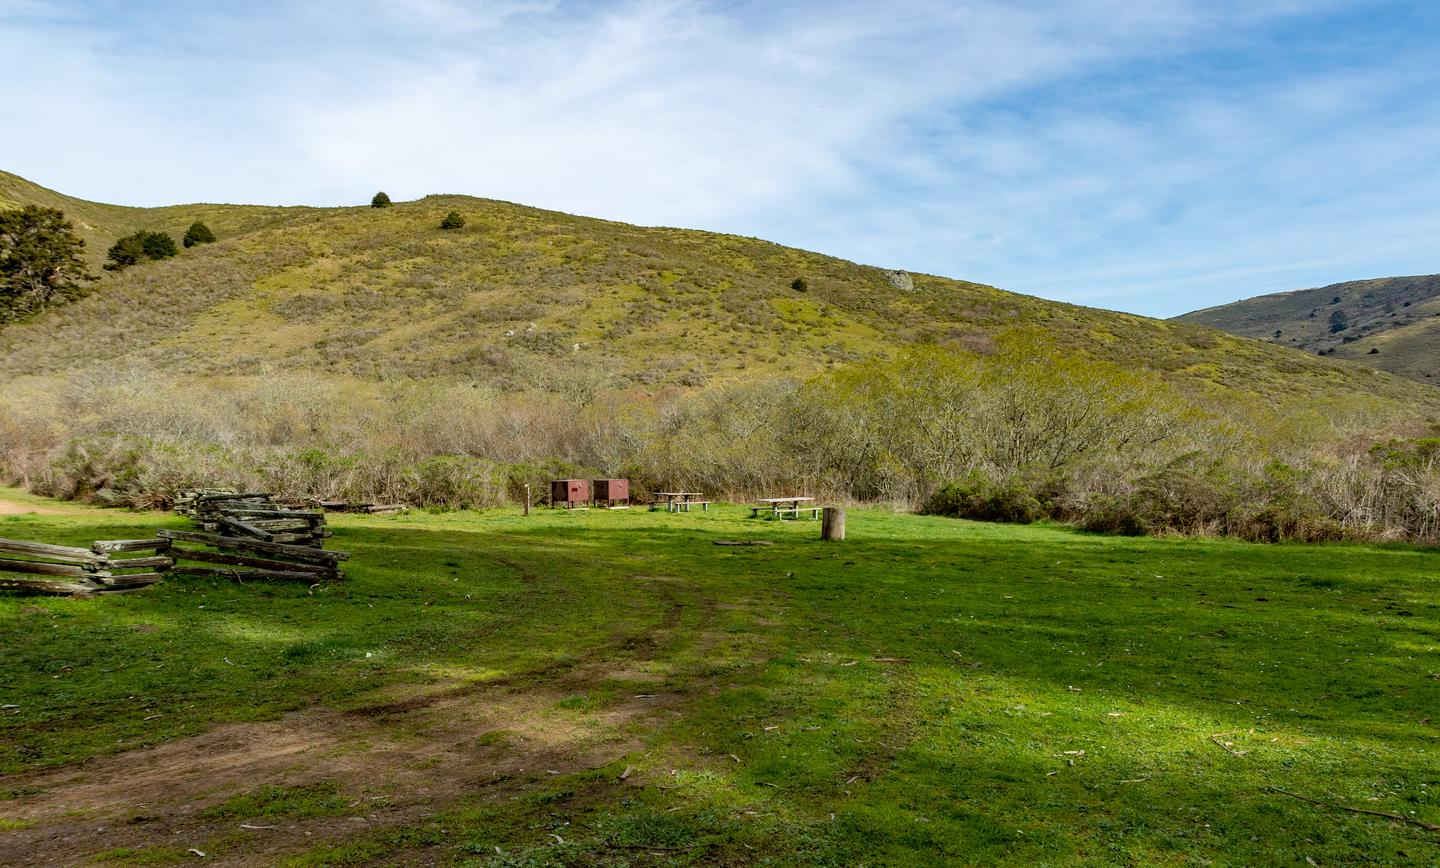 Big grassy field with bear lockers and picnic tables. Shrub covered hills in the distance.Wide view of Haypress Group Site.